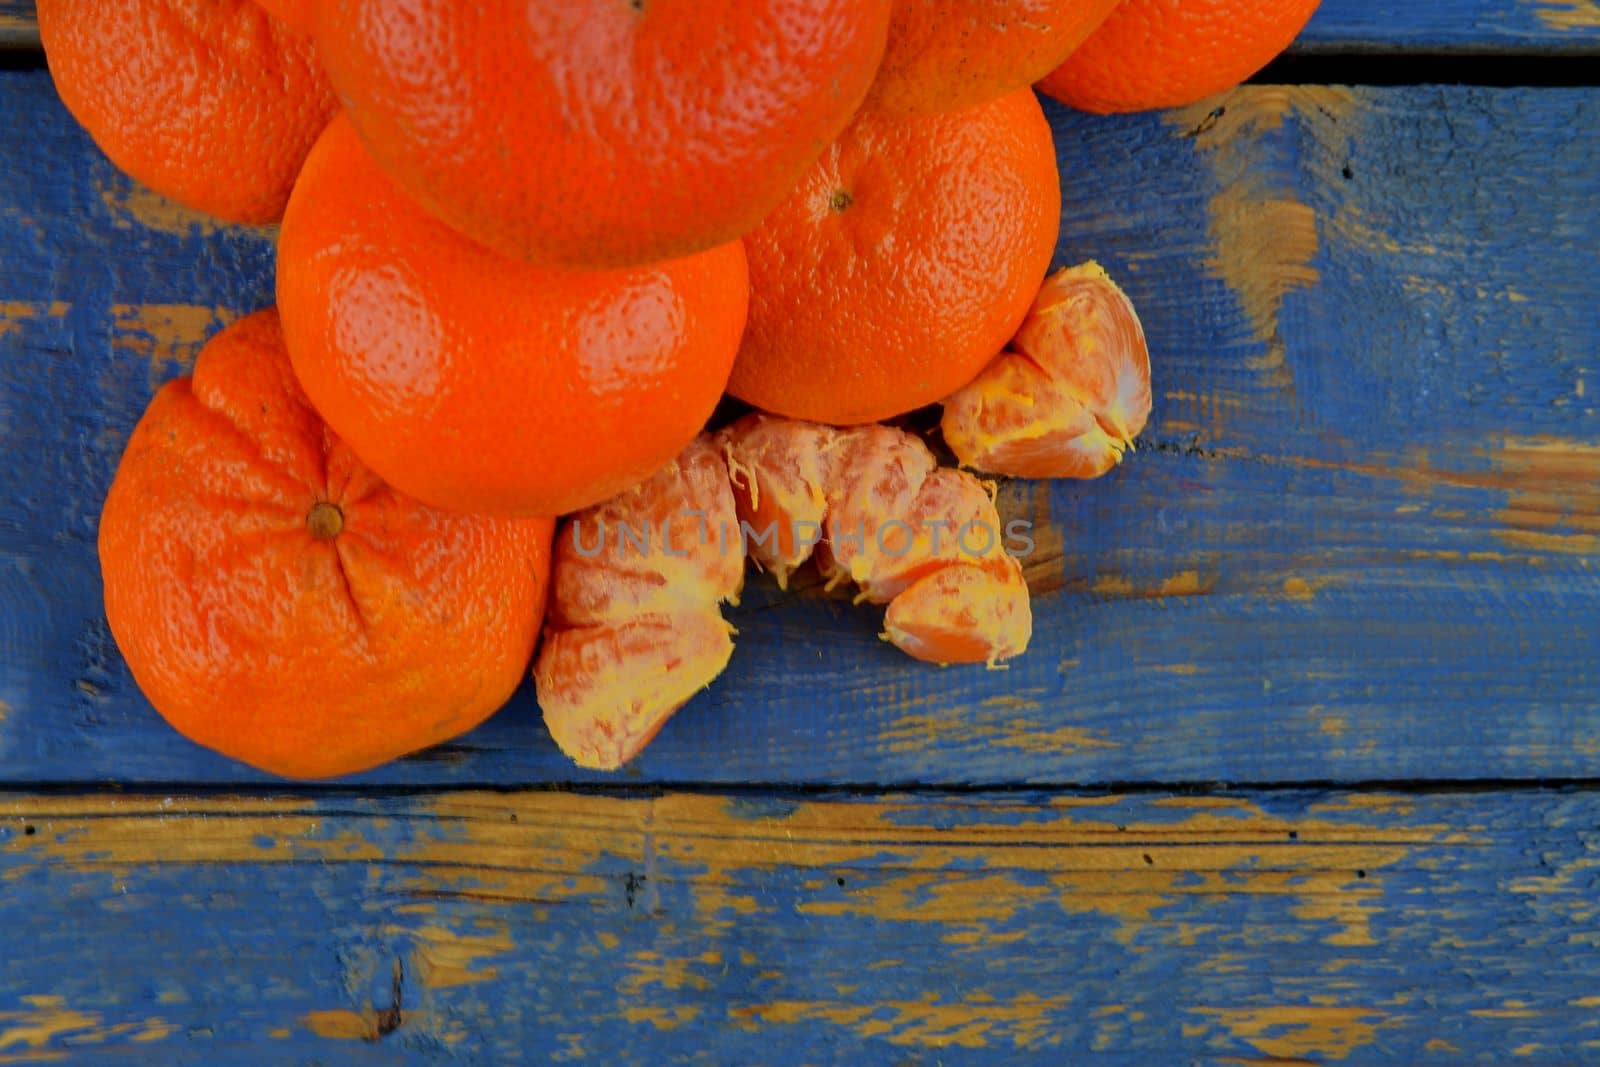 Tangerines on wooden background. Healthy and diet concept. 